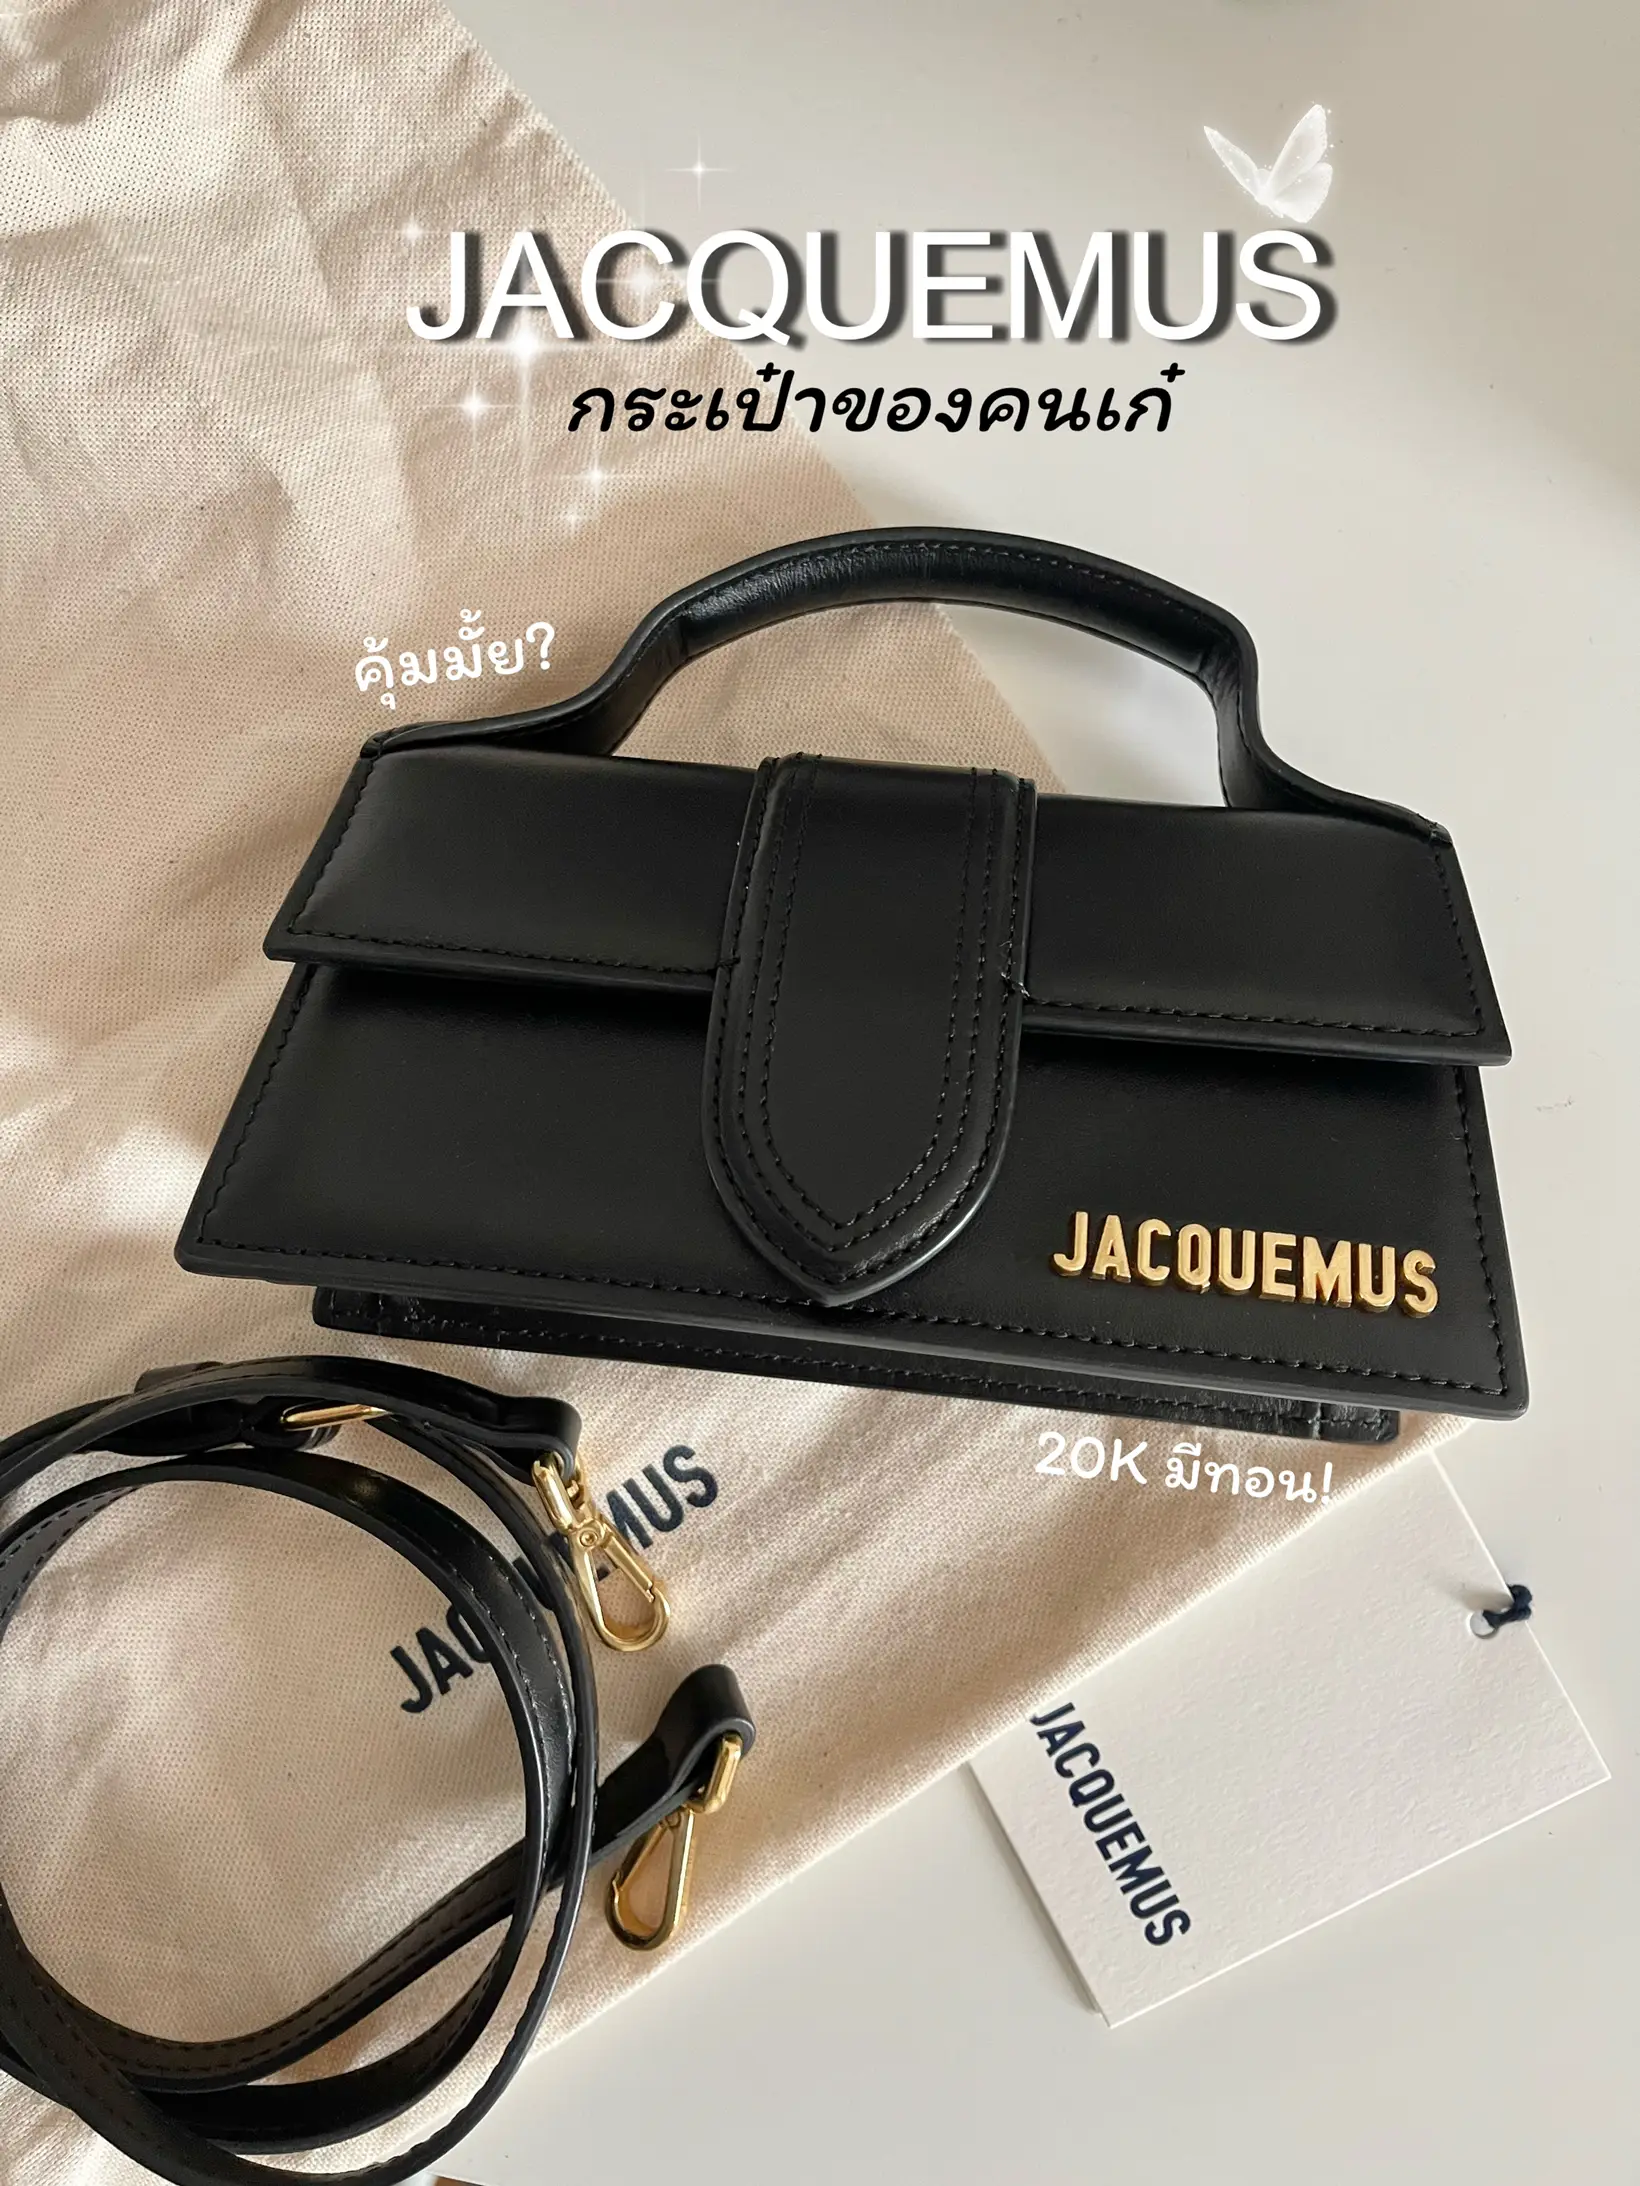 Famous Jacquemus chiquito bag and how to style it